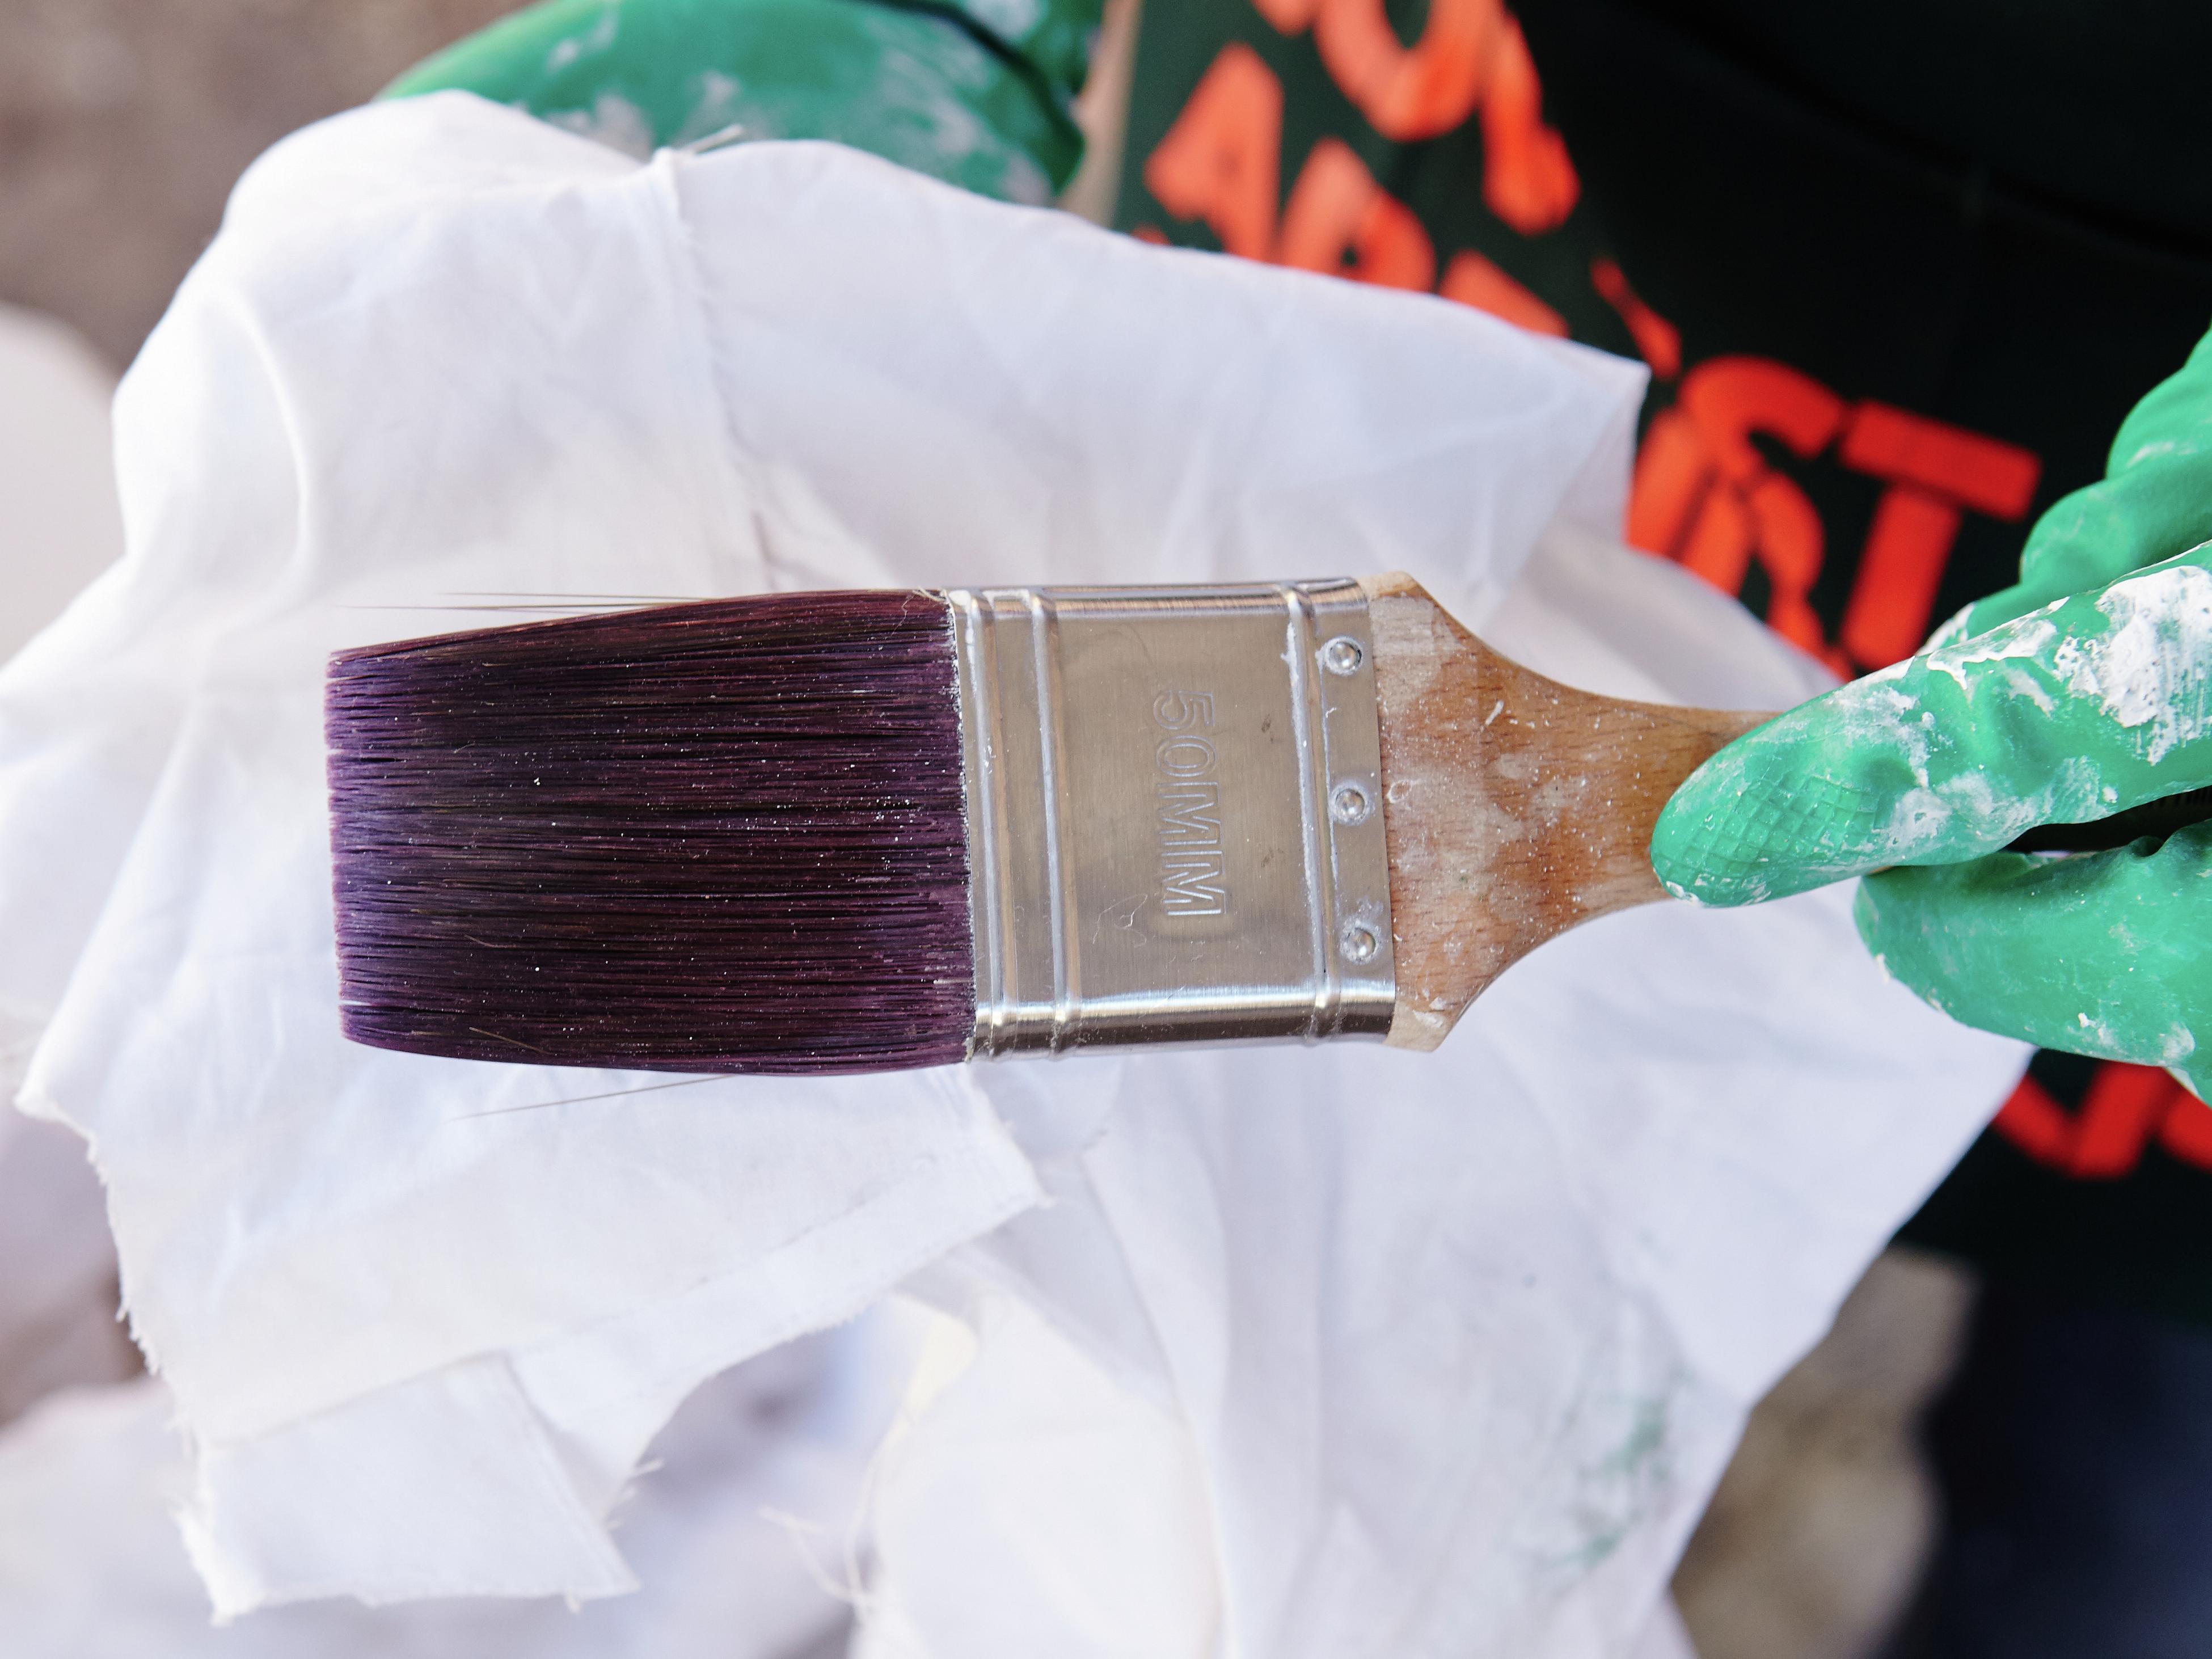 How To Clean Paint Brushes - Bunnings Australia